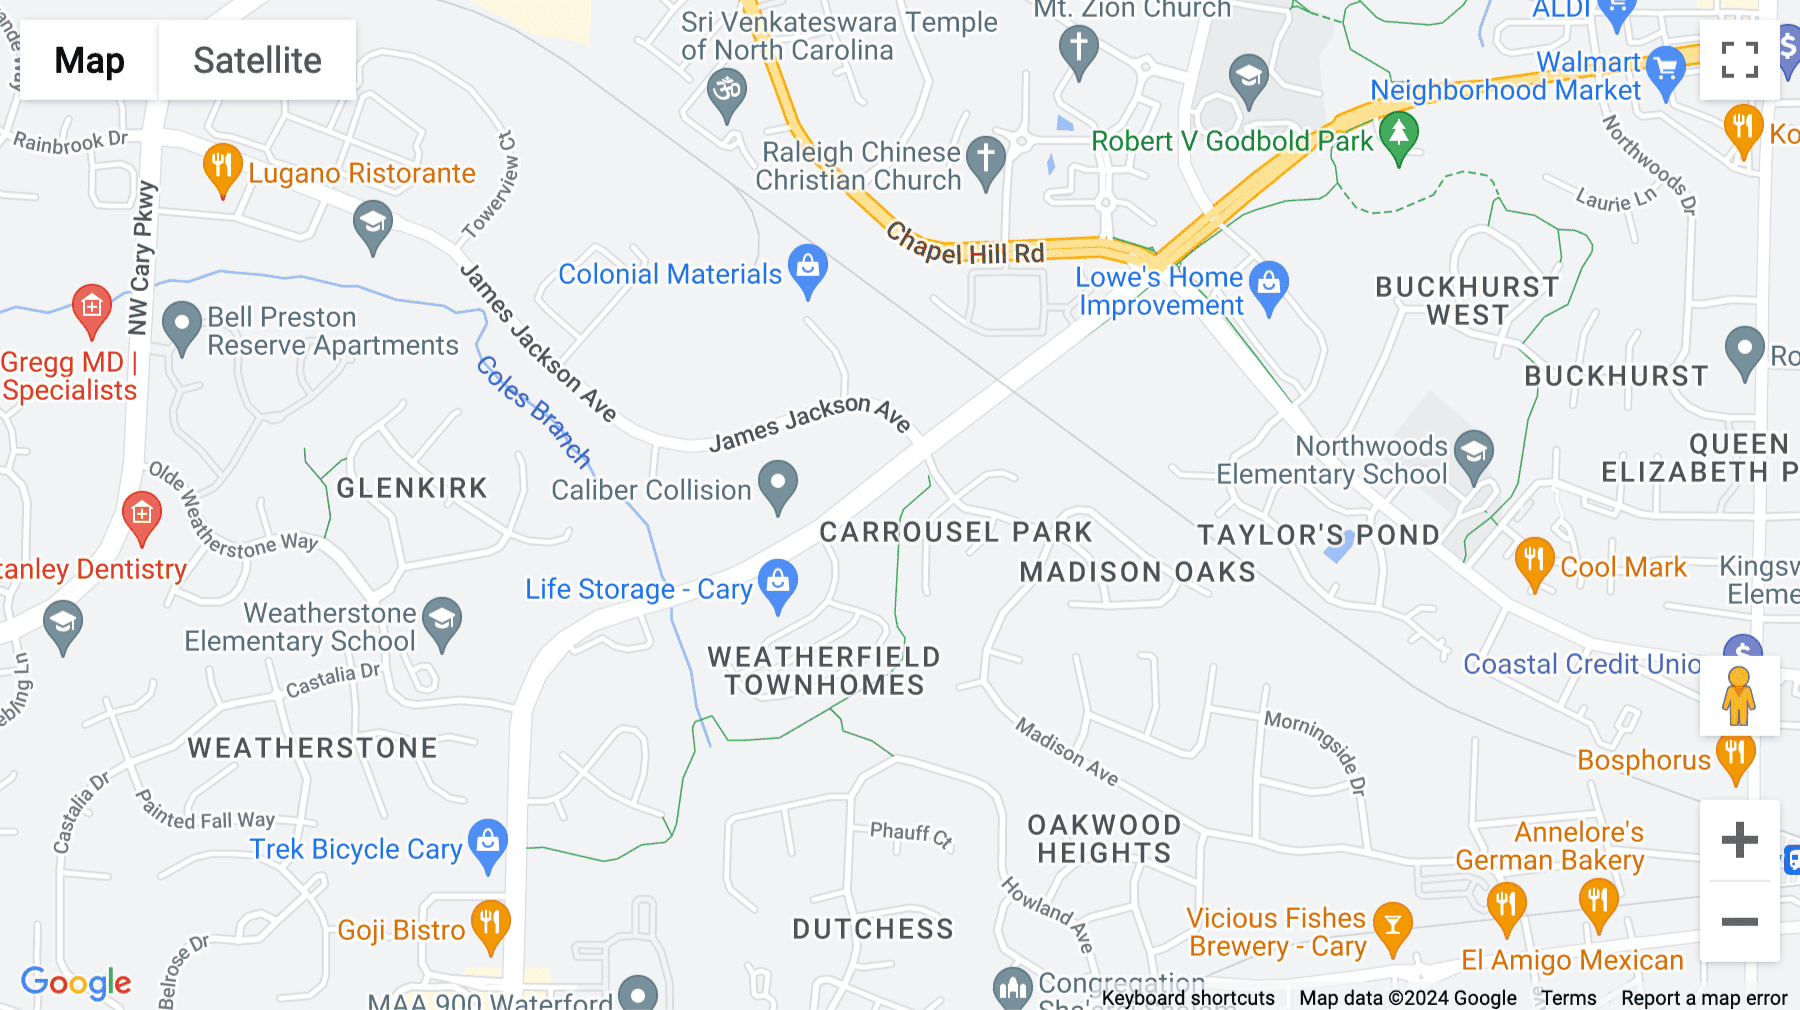 Click for interative map of 1750 NW Maynard Road, STE 100, Cary